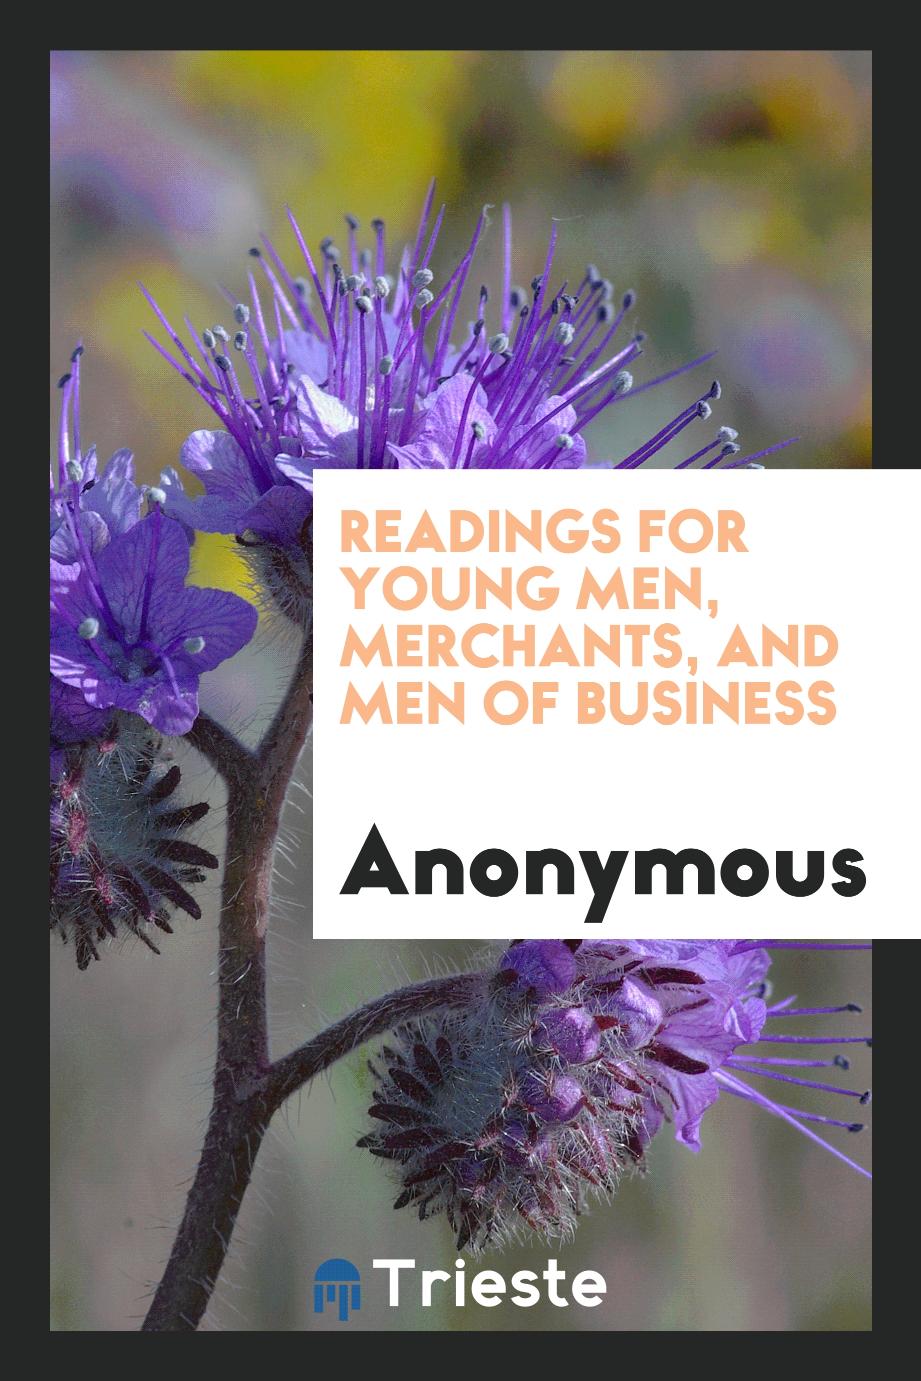 Readings for Young Men, Merchants, and Men of Business